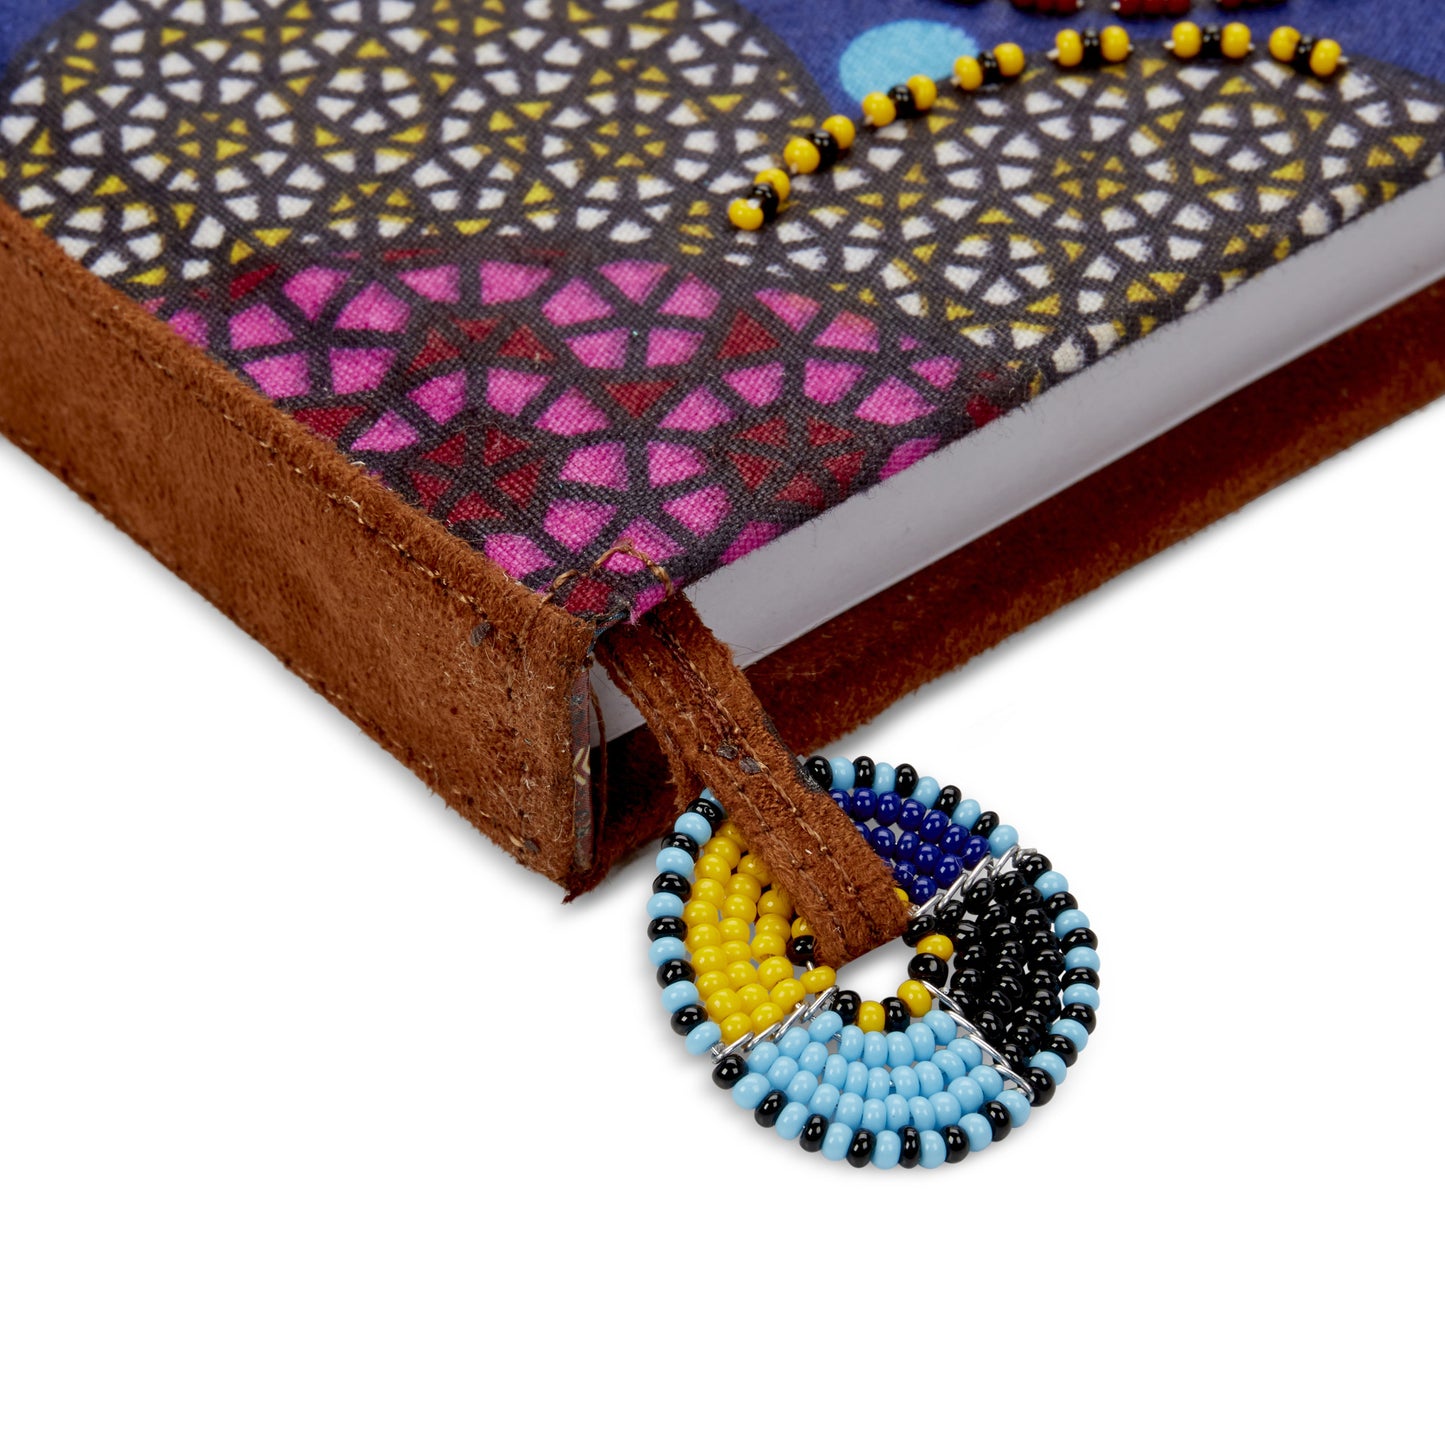 Notebook Wrapped in Kitenge Fabric, Medium- "Inflorescence"